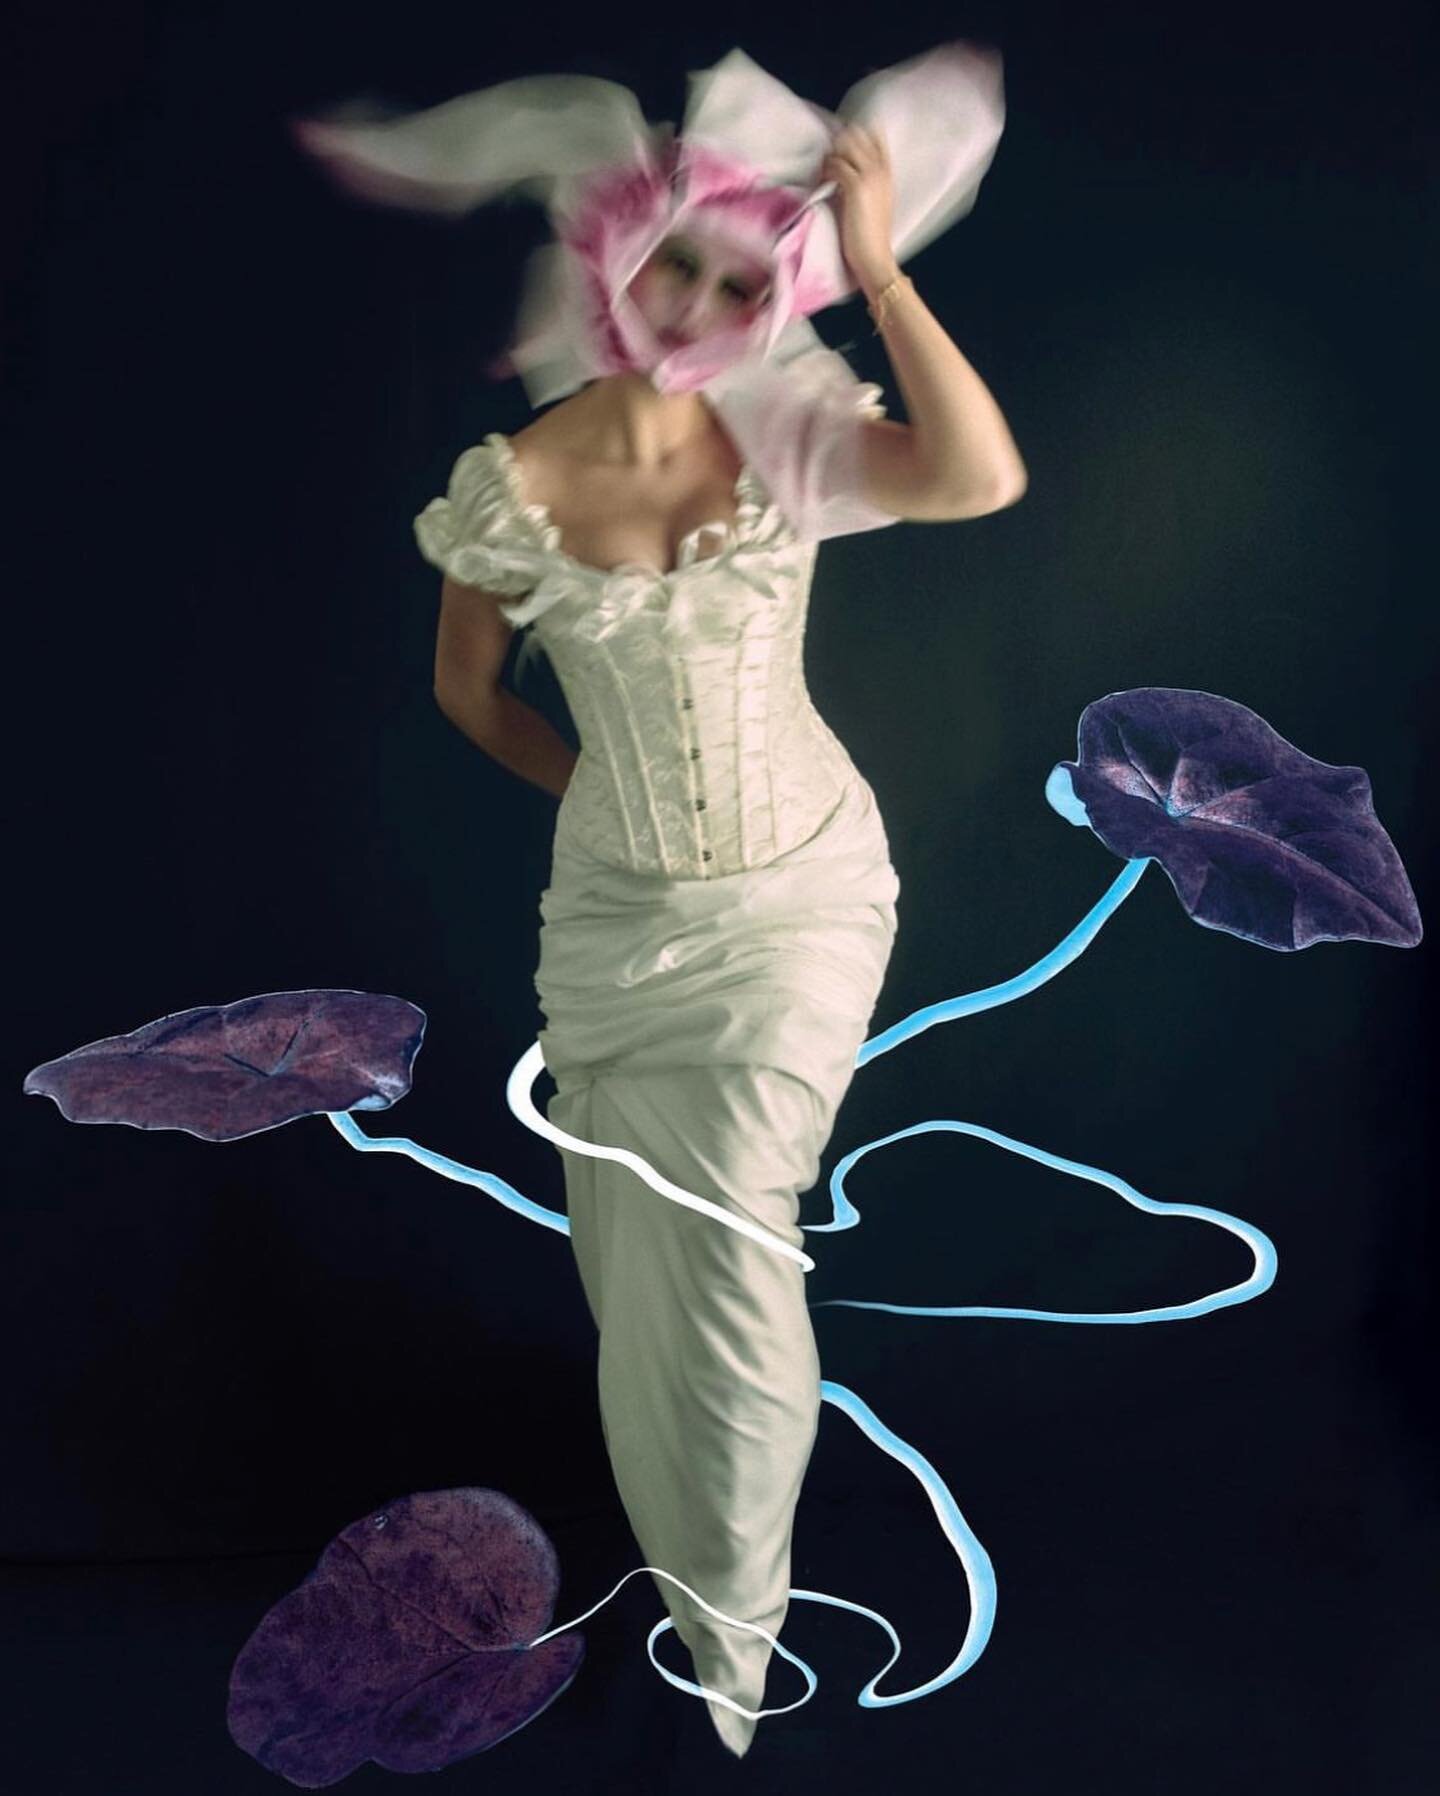 @nourchoukeirportfolio recent projects about a surrealistic Tableau Vivant documenting a human transformation into a Cyclamen flower. The artwork explores the idea of metamorphosis and blurs the boundaries between humans and nature, inviting the view